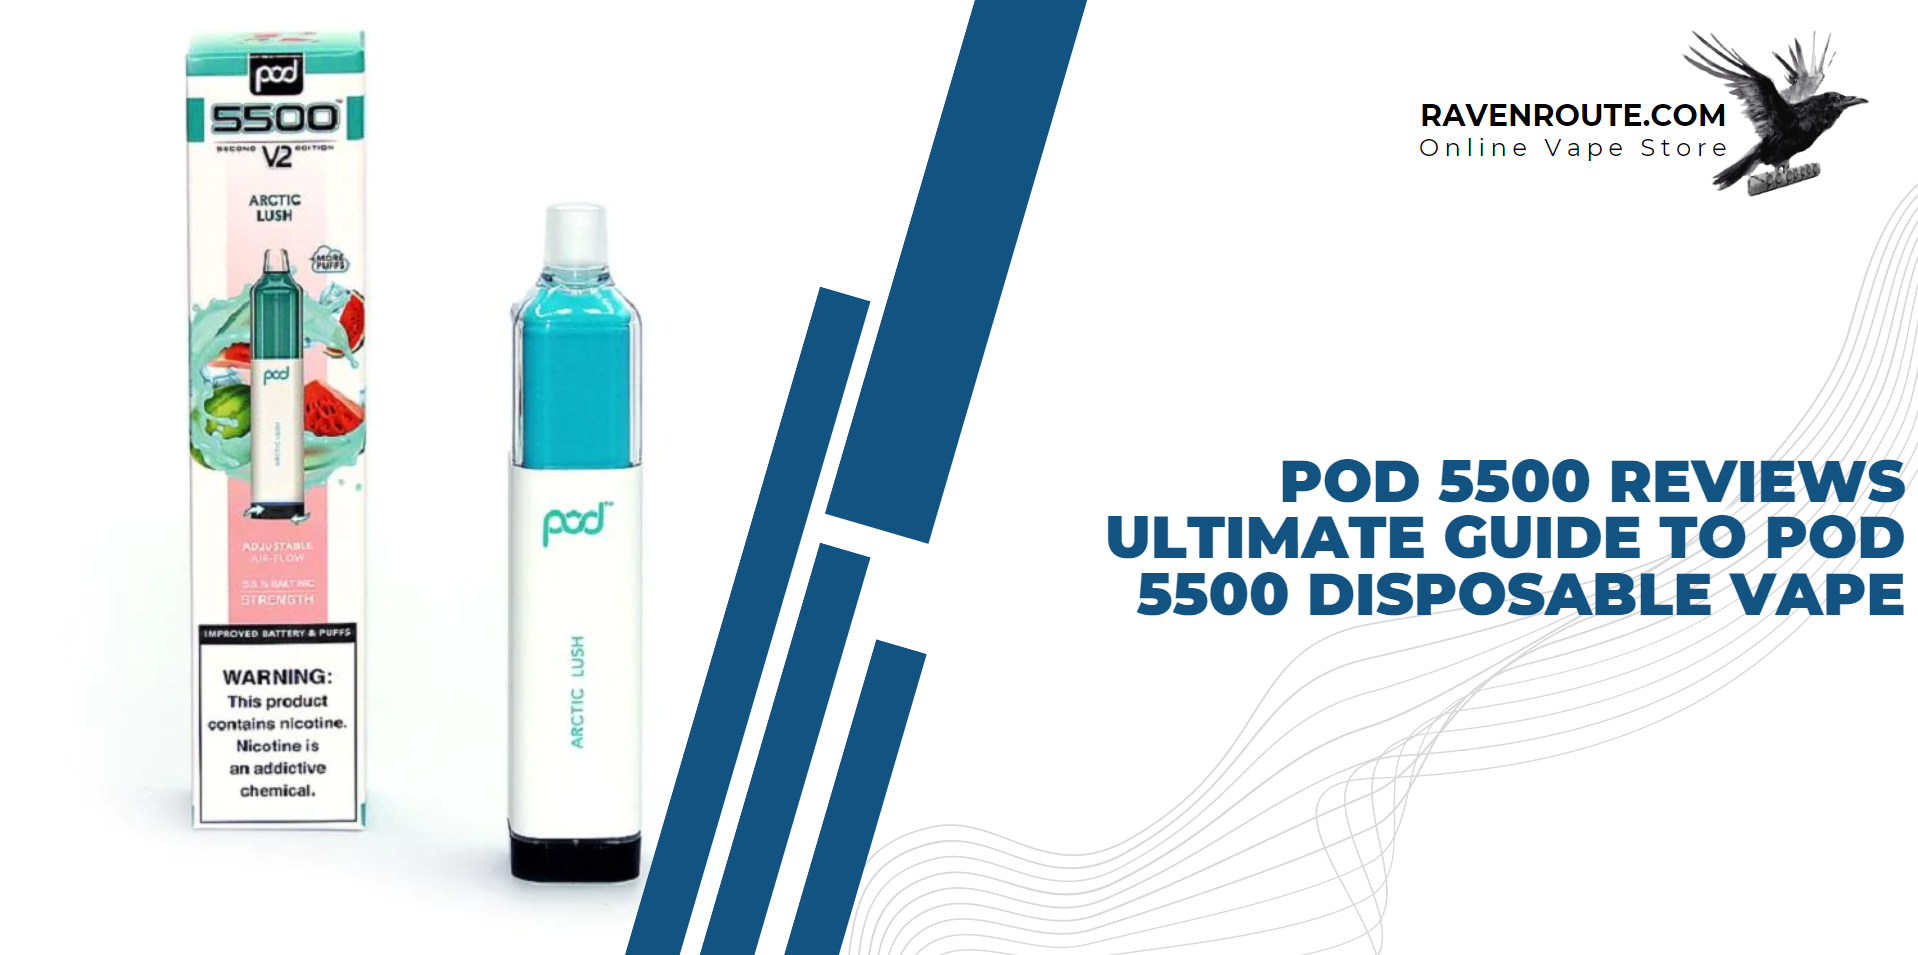 Pod 5500 Reviews - Ultimate Guide to Pod 5500 Disposable Vape